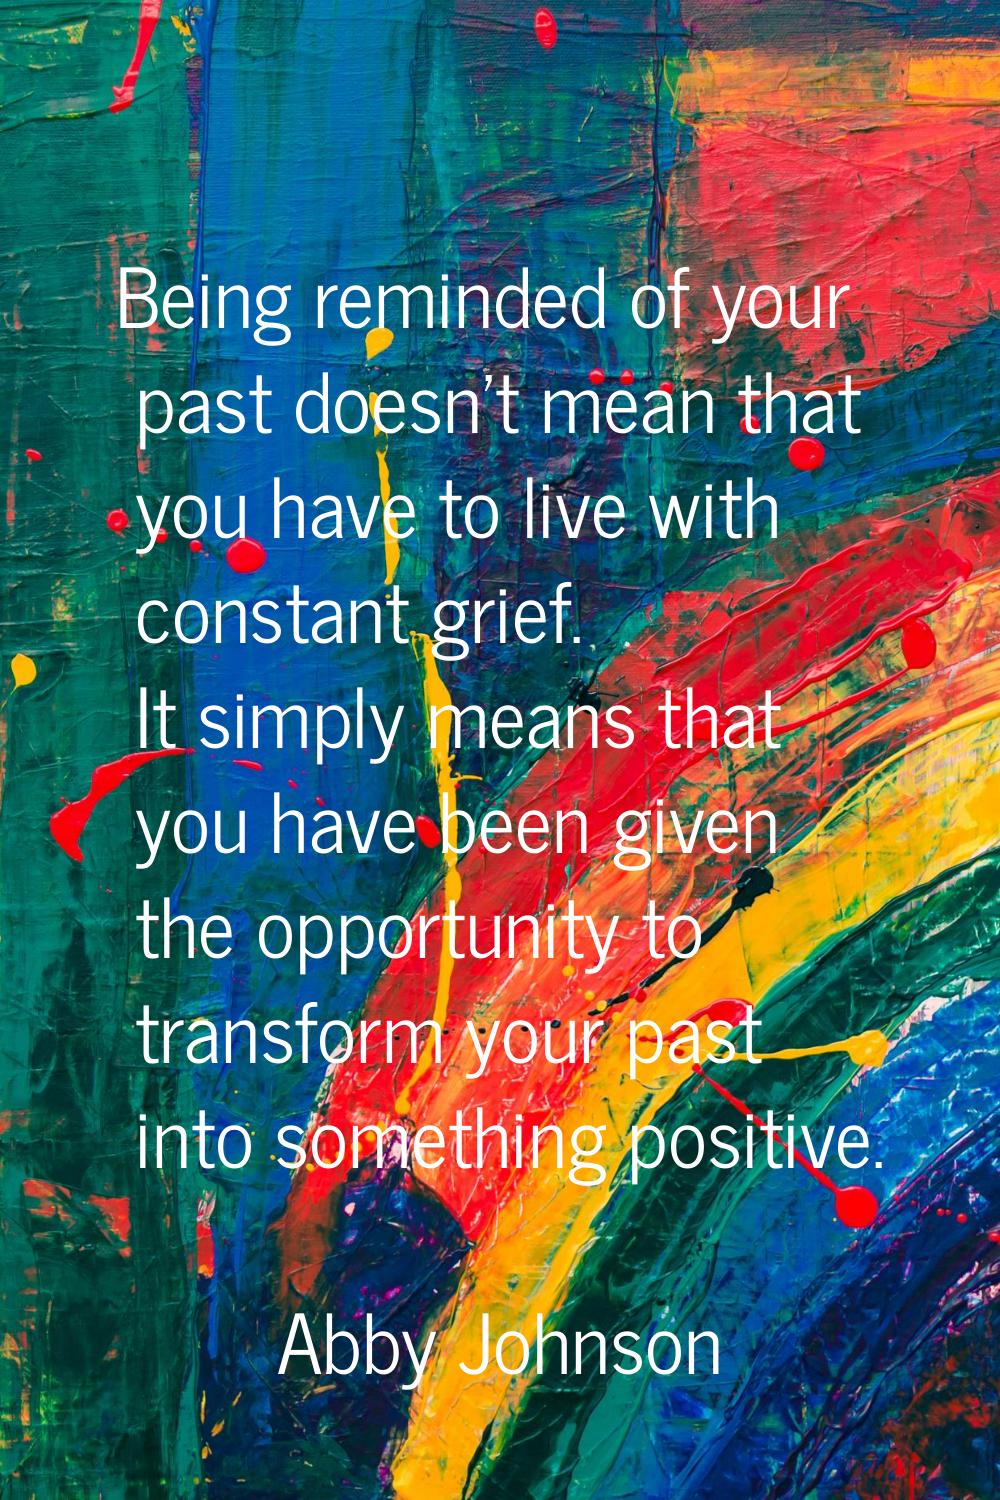 Being reminded of your past doesn't mean that you have to live with constant grief. It simply means